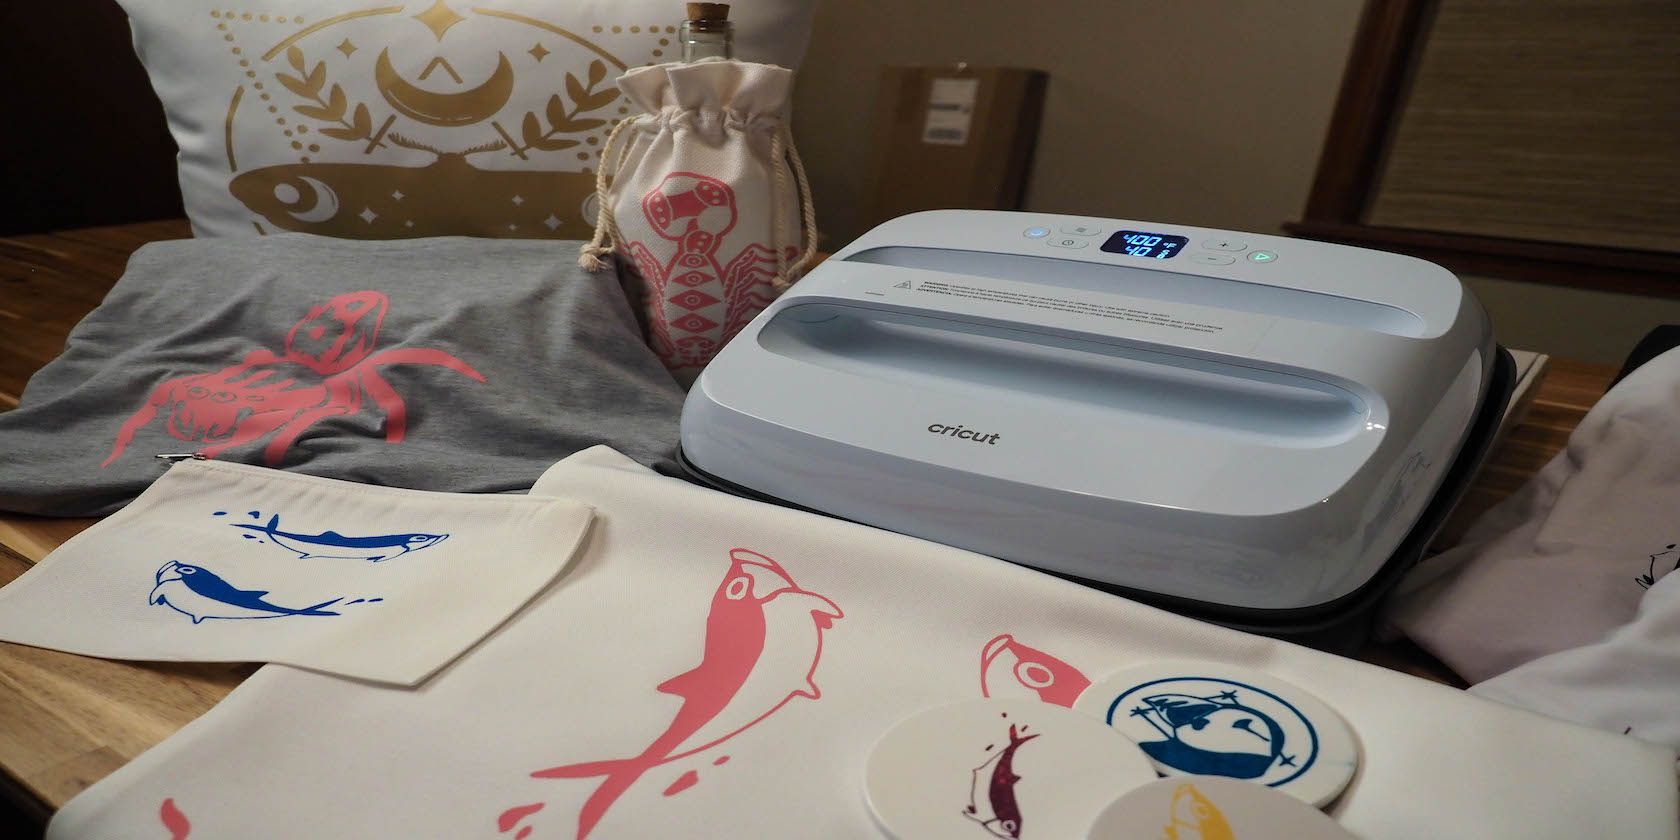 iTWire - The new Cricut EasyPress 3 helps you make magic with even more  reliability and ease